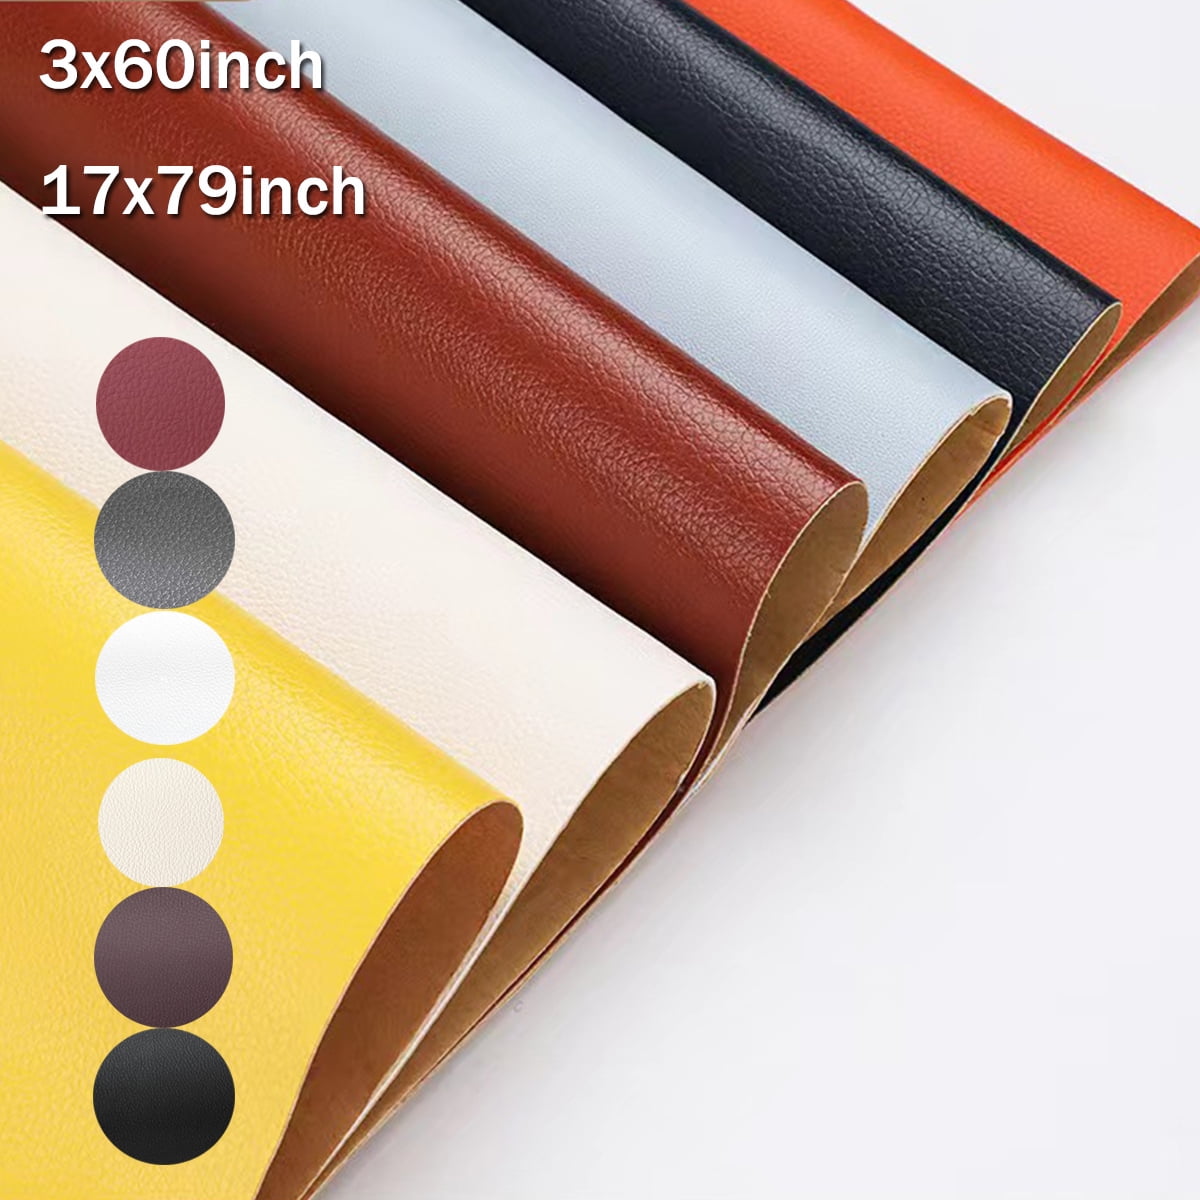  Leather Repair Tape, Leather Repair Patch for Couches  Self-Adhesive Couch Patch 3x60 inch Self Adhesive Leather Repair Patch Tape  Kit for Furniture, Sofa, Couch, Car Seats, Chairs, Fabric Fix - Black 